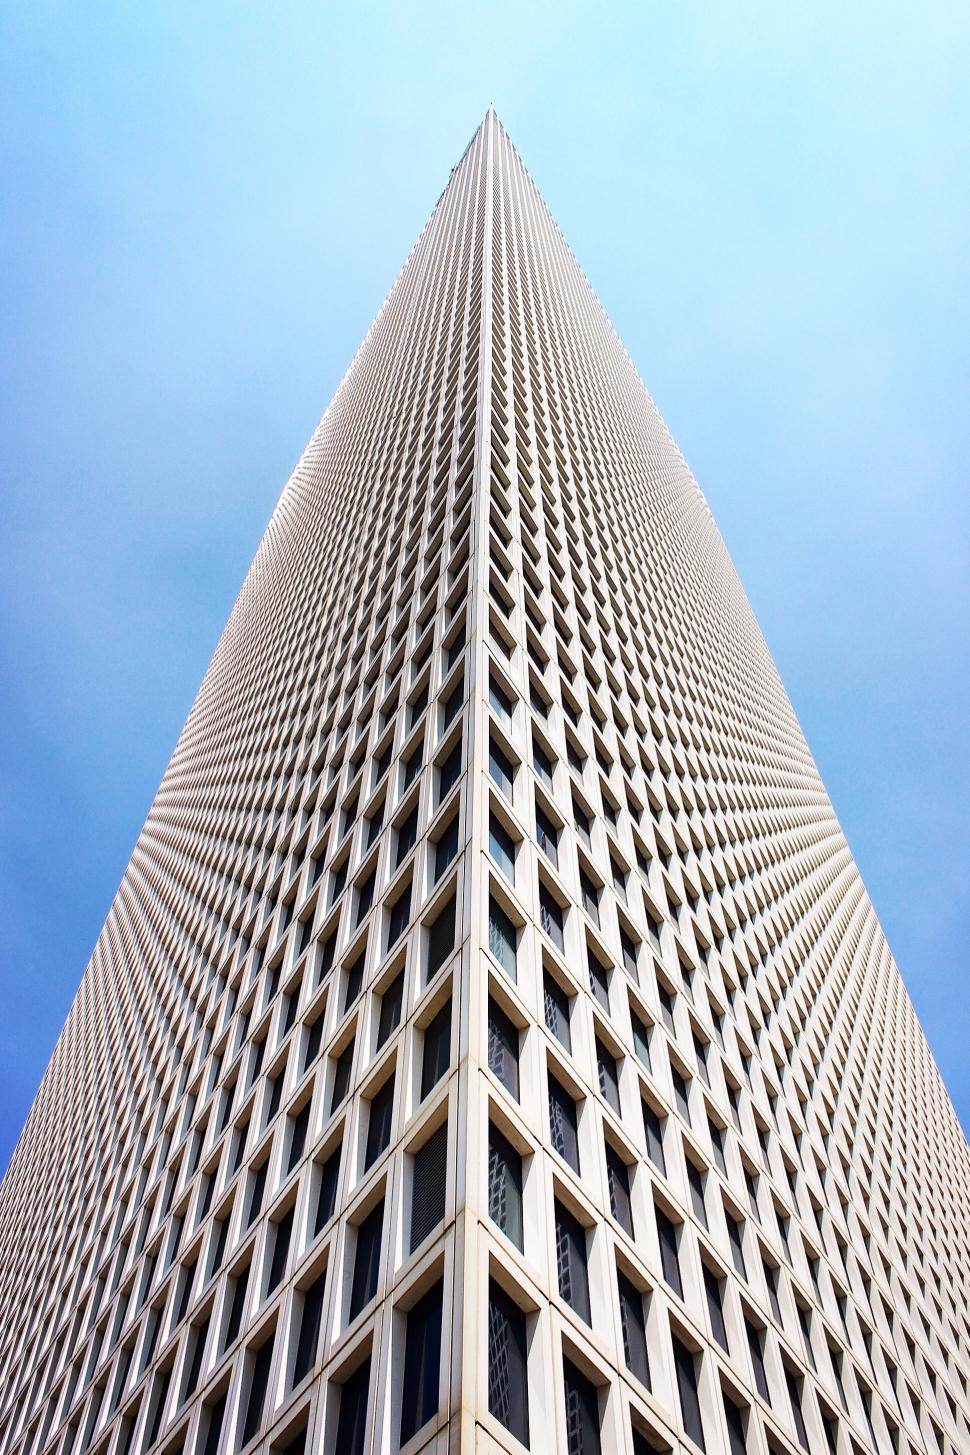 Free Image of Skyscraper with patterned facade against sky 